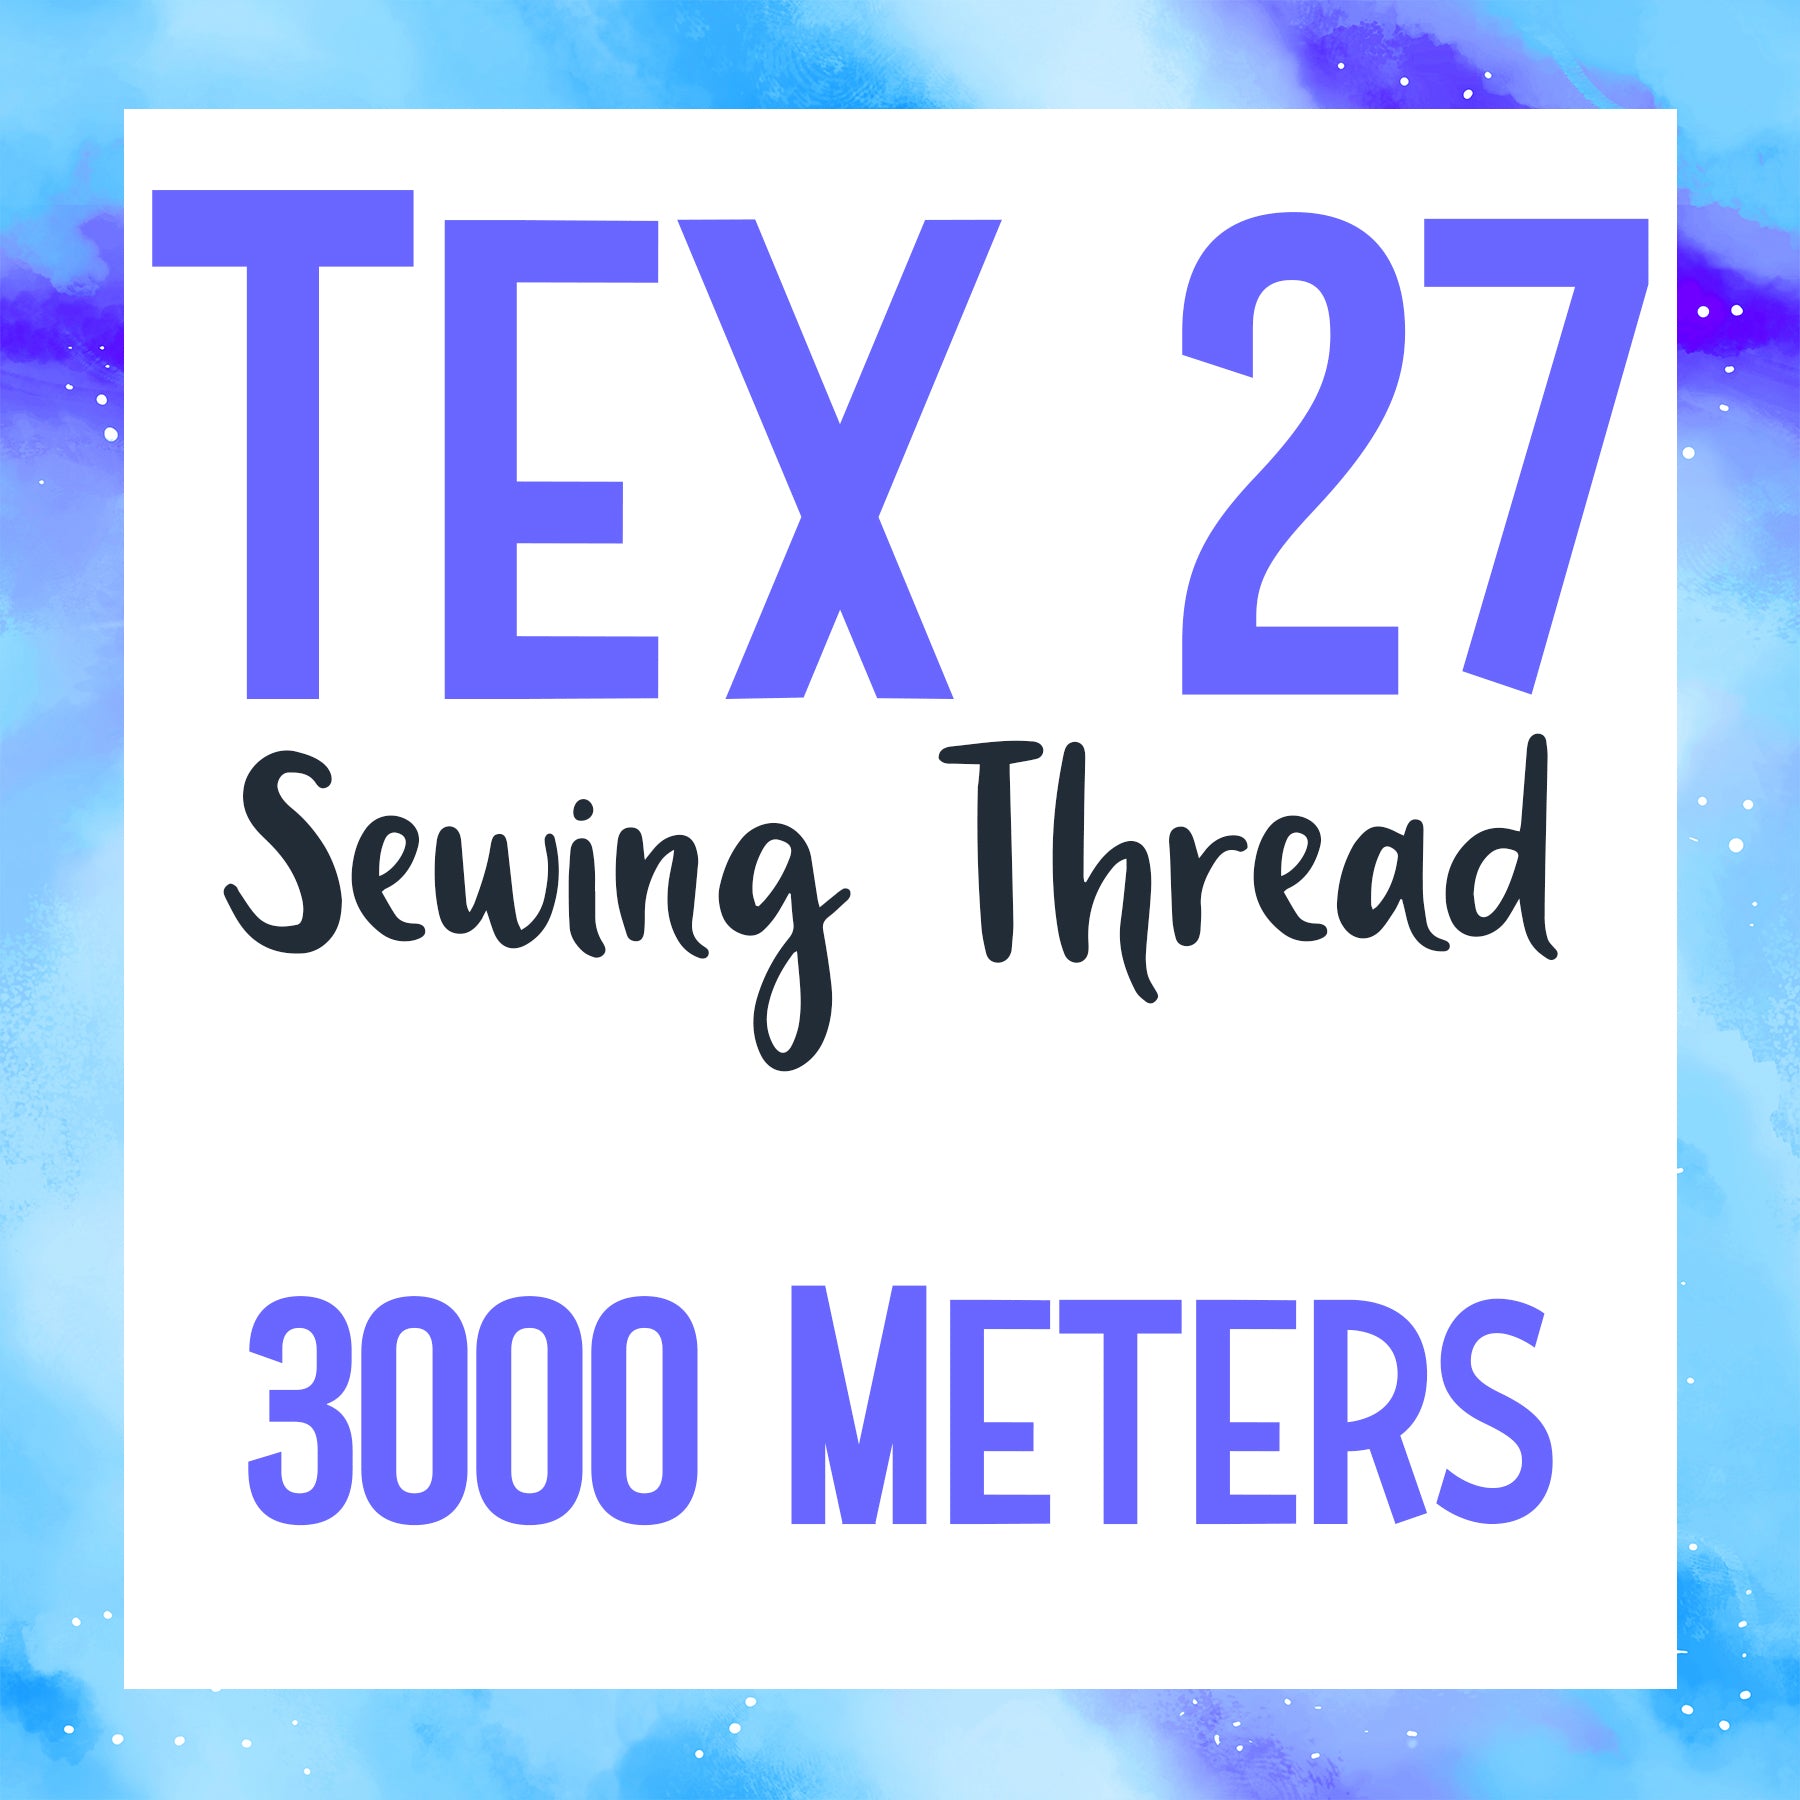 RETAIL THREAD Tex 27 Polyester Sewing Thread (3000 Meters) Multicolor